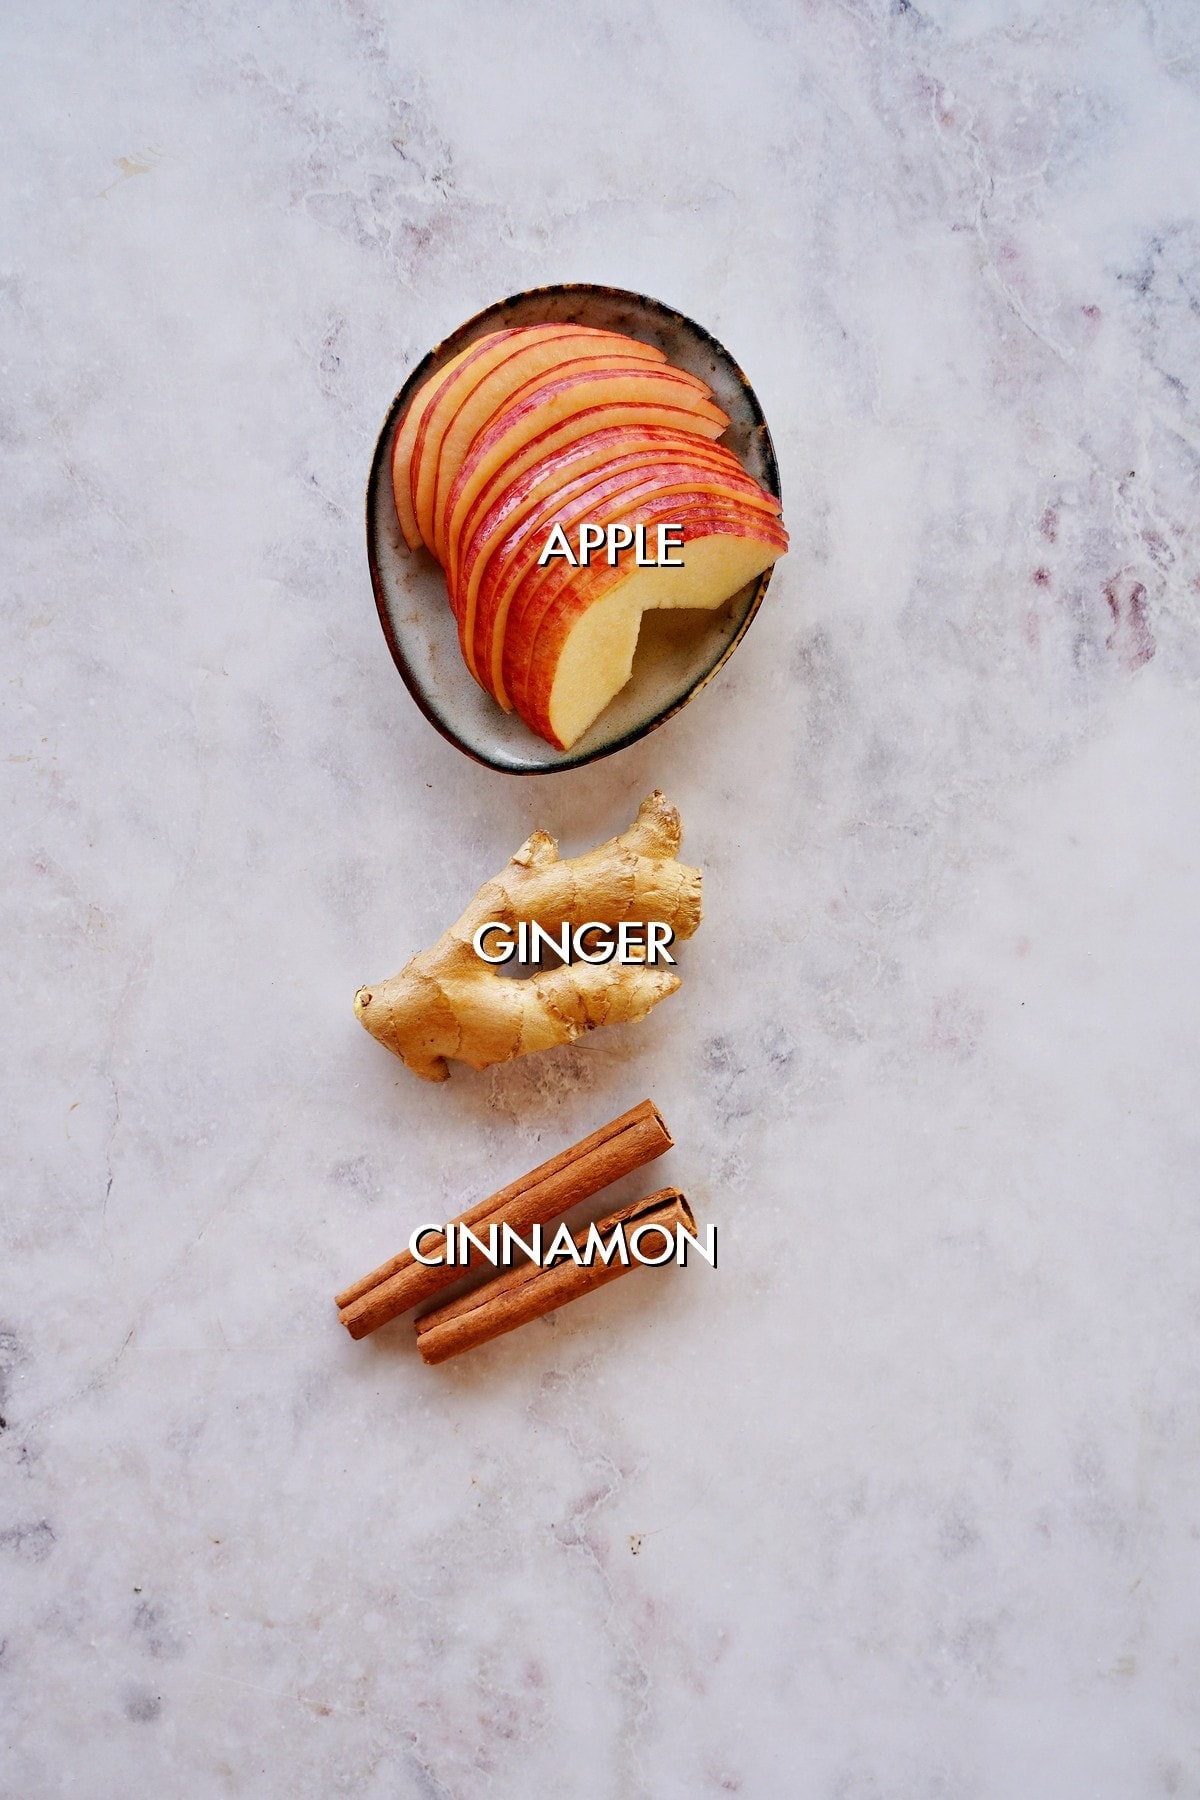 apple, ginger and cinnamon on white backdrop